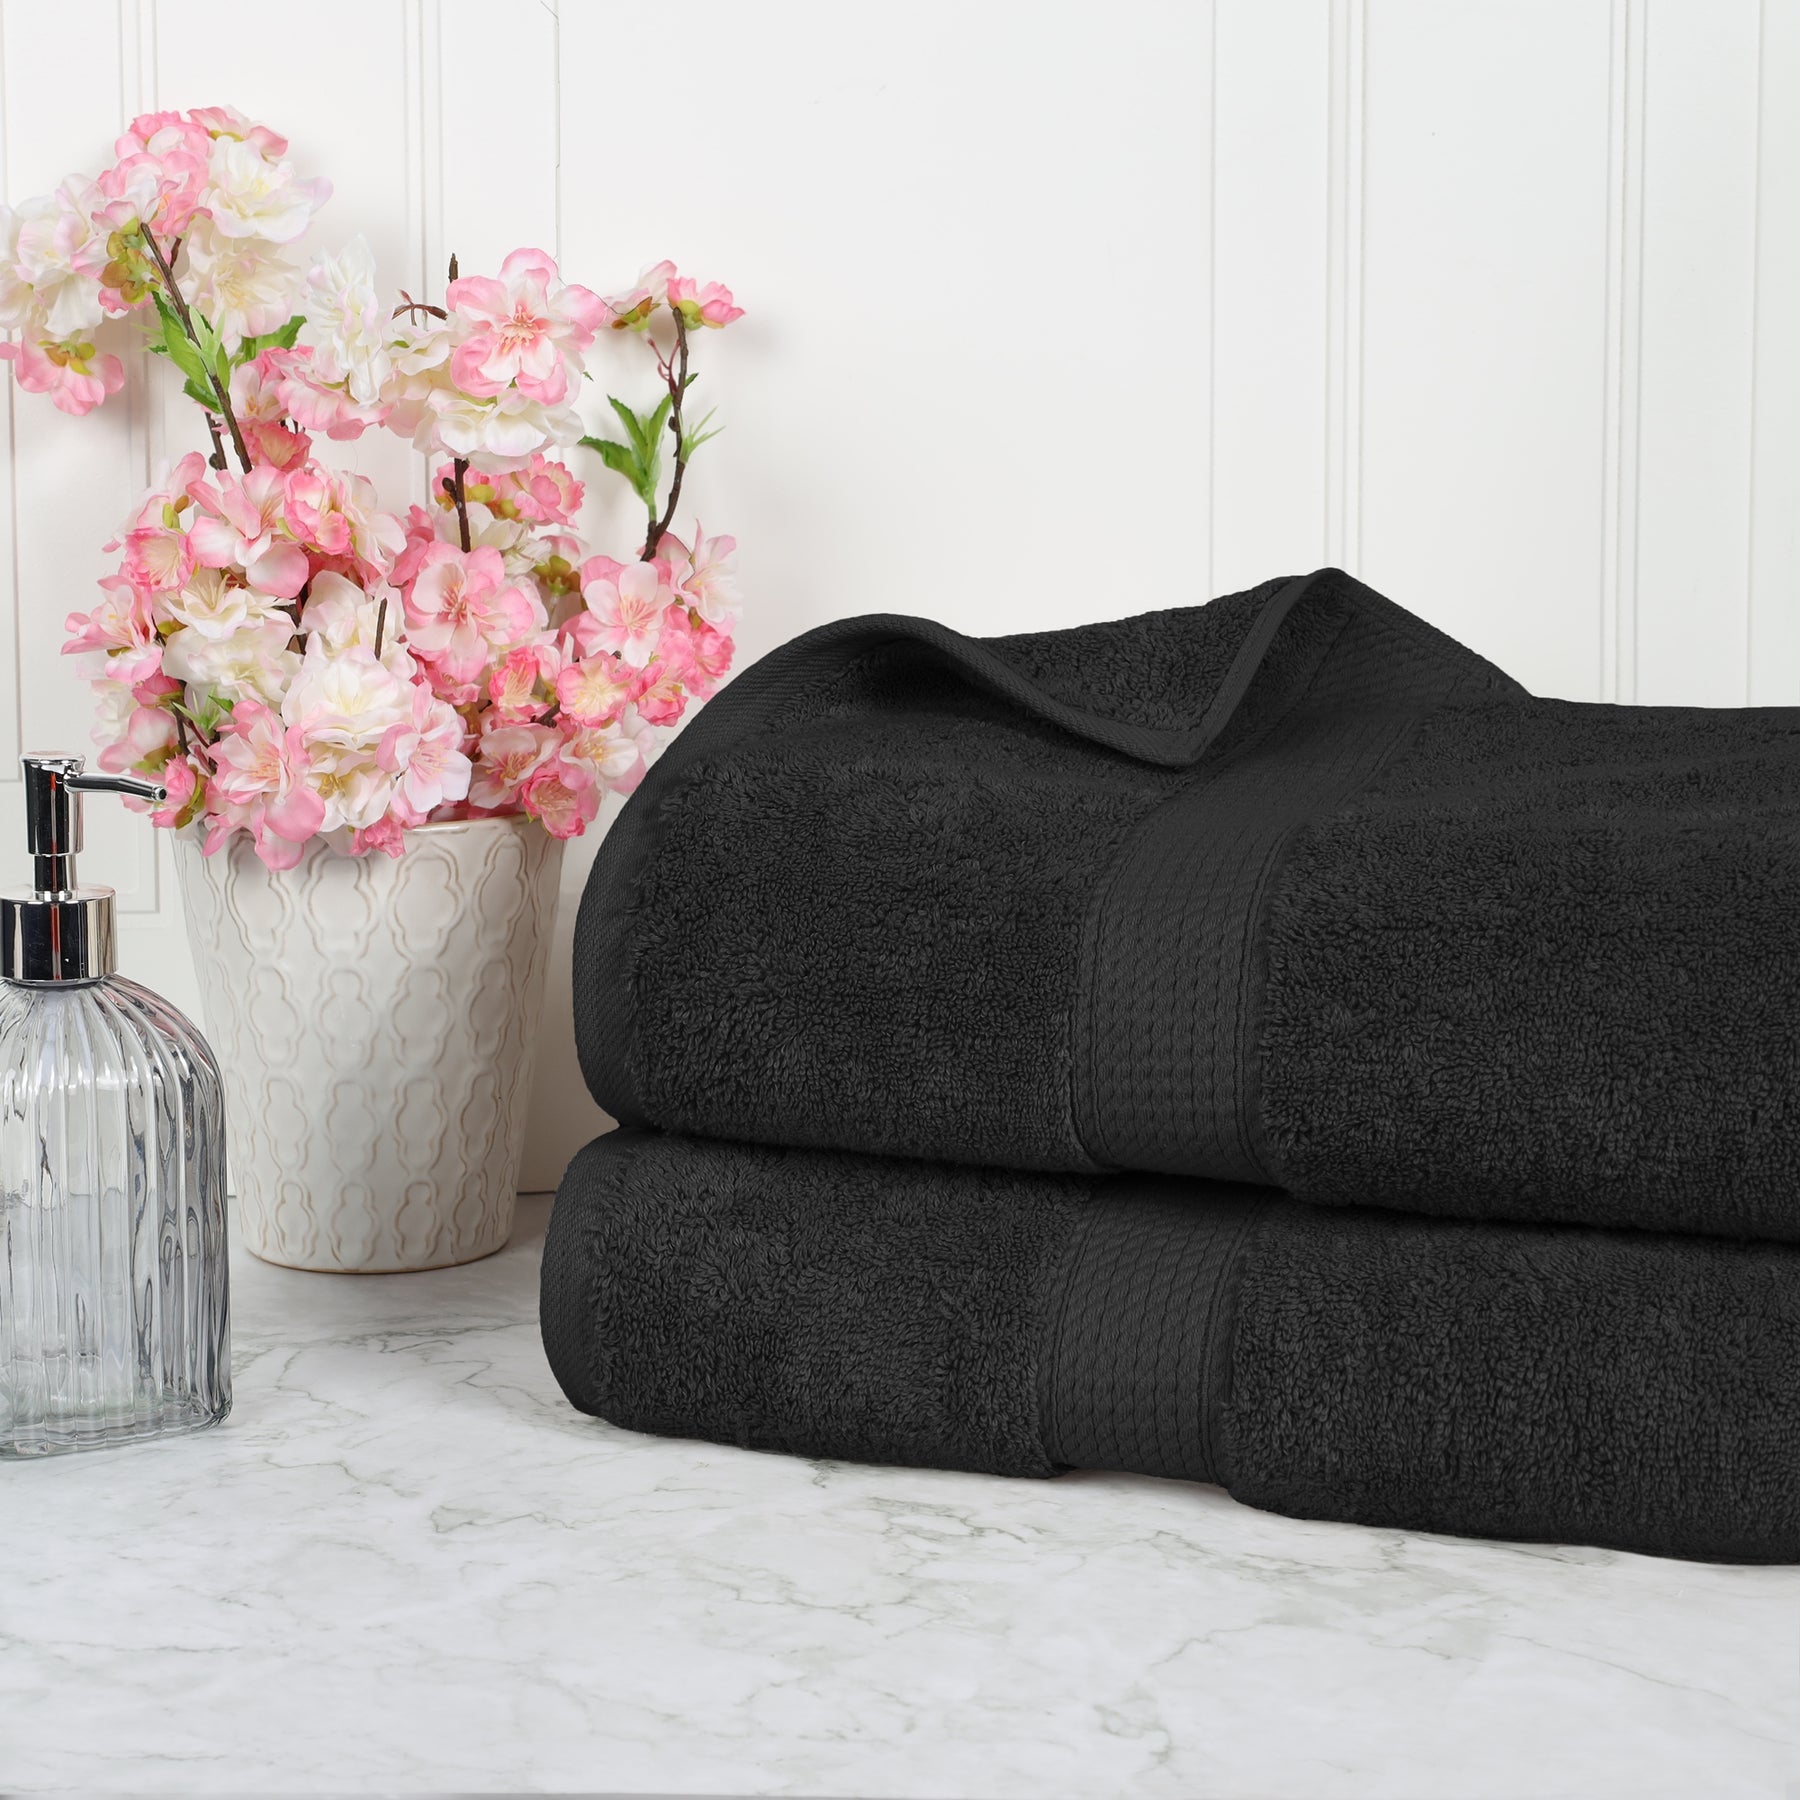 Egyptian Cotton Highly Absorbent 2 Piece Ultra-Plush Solid Bath Sheet Set - Black